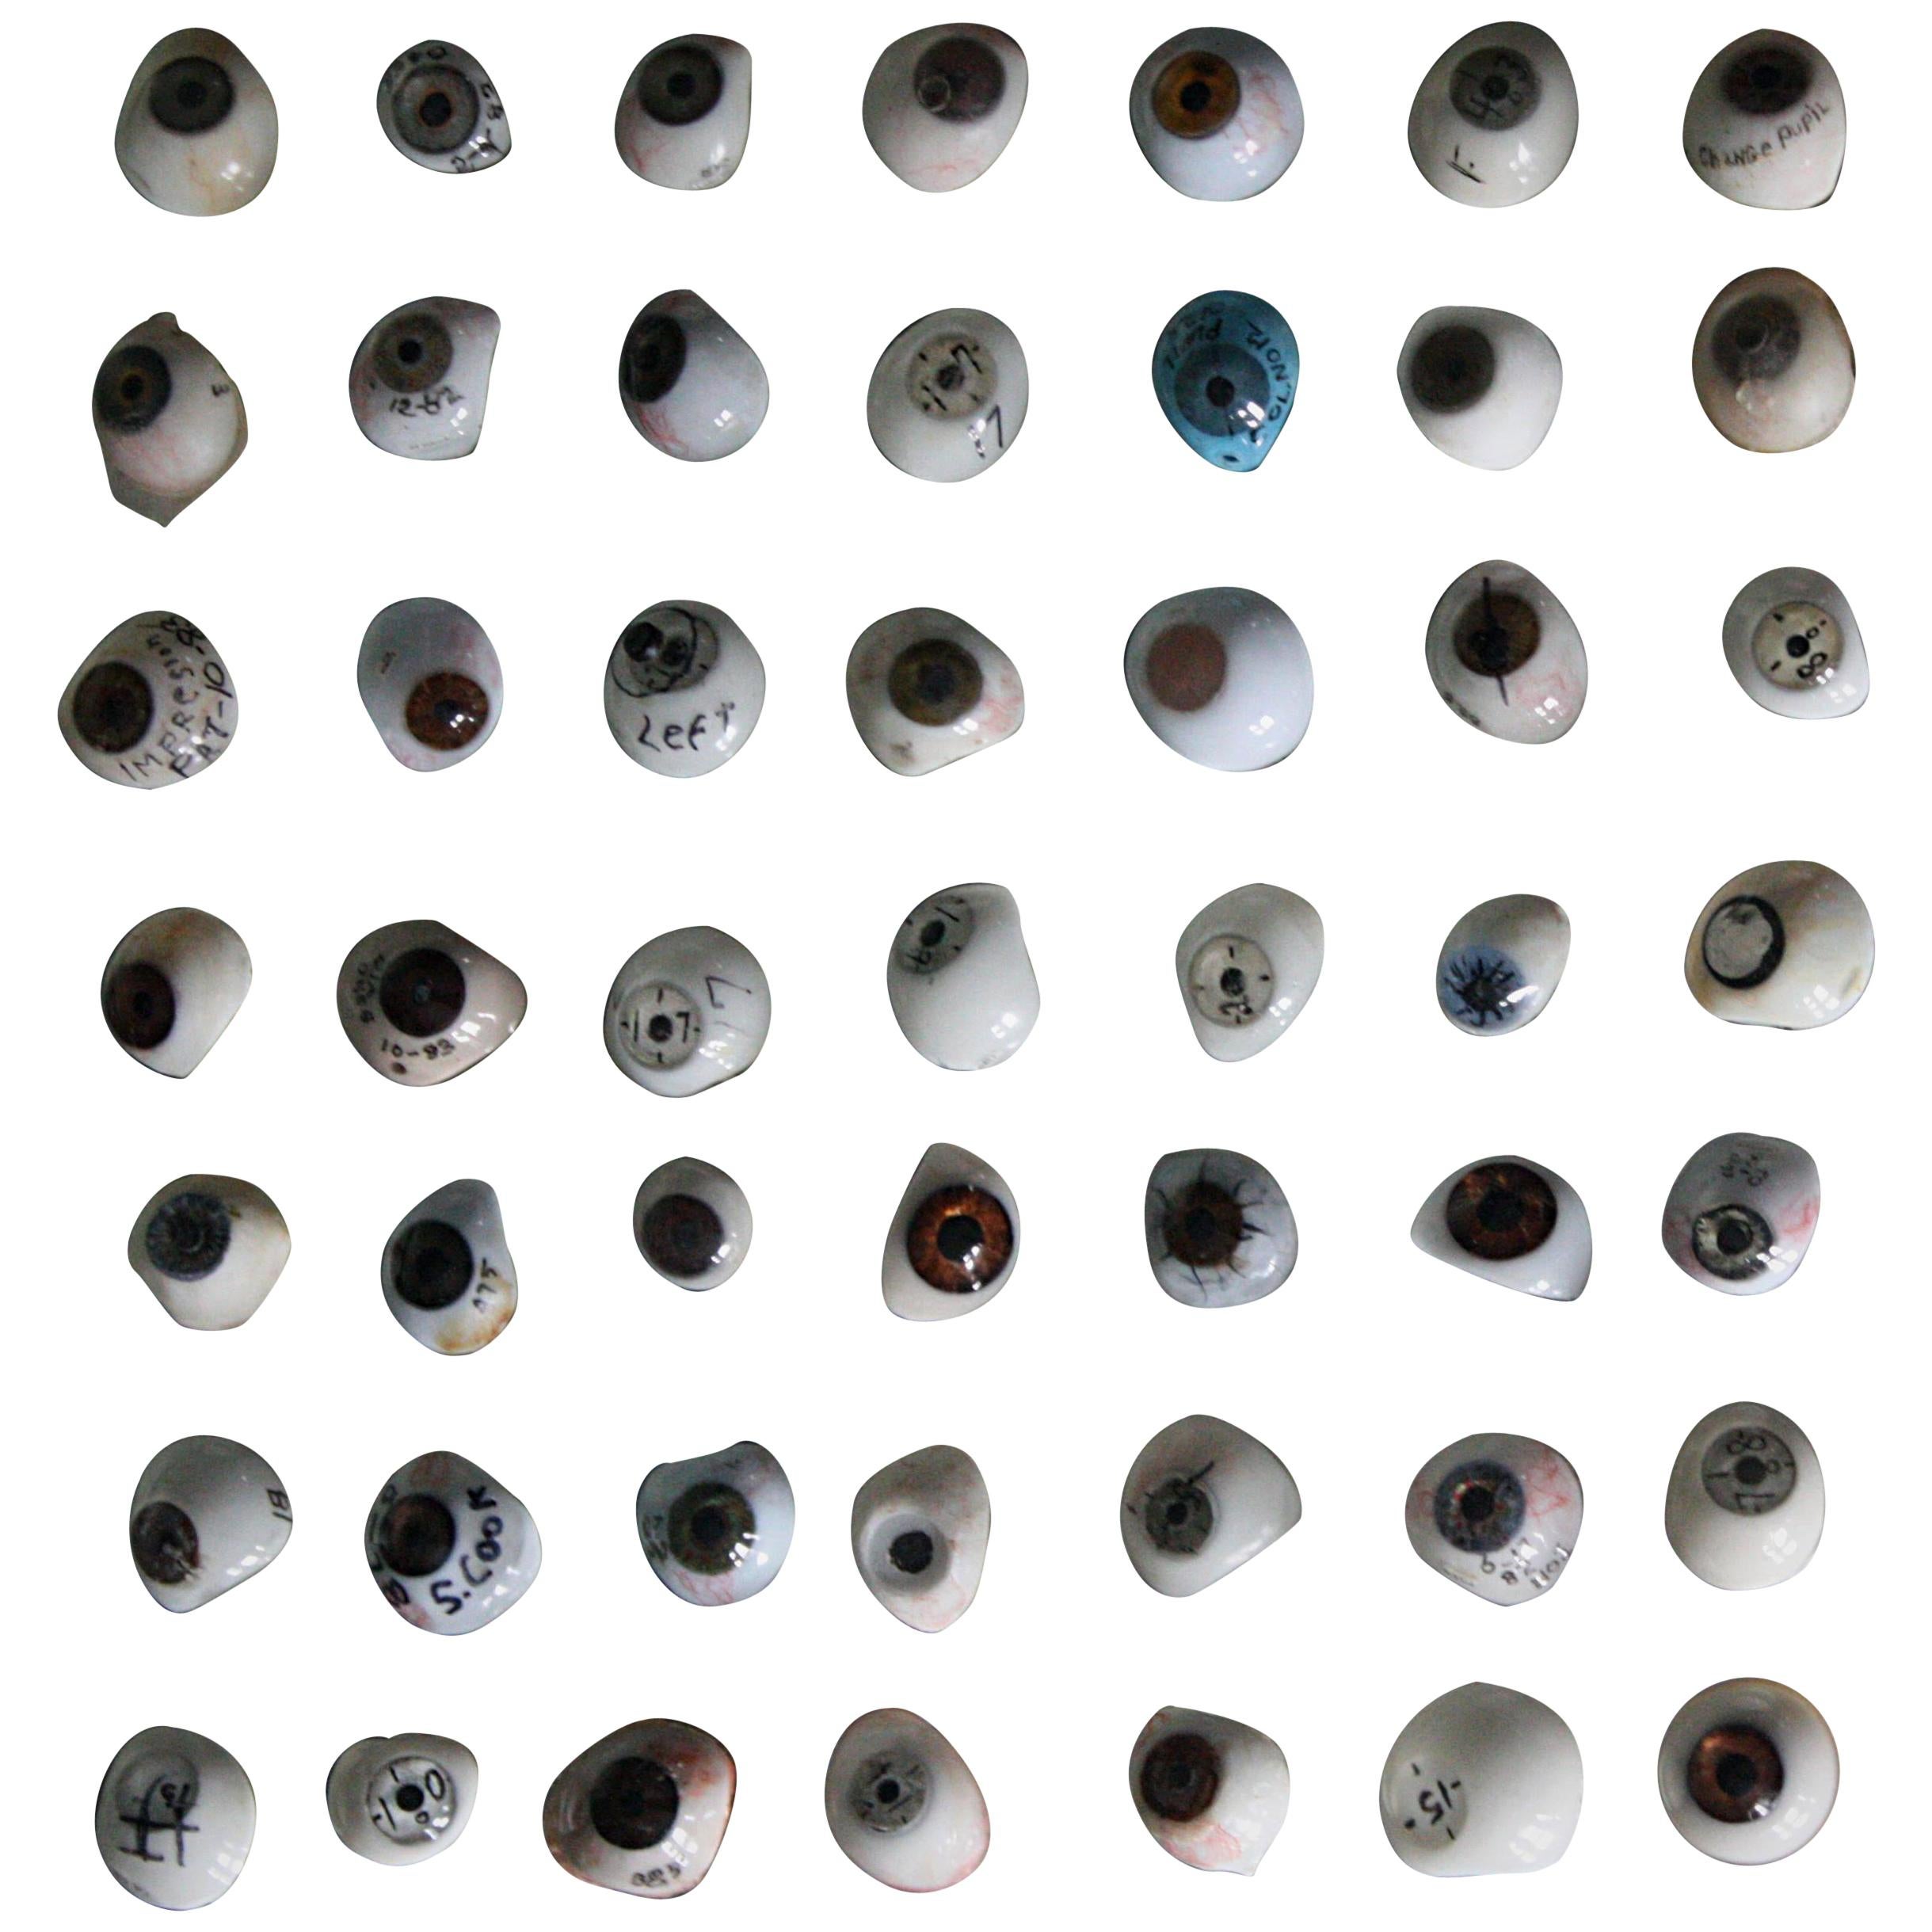 Early 20th Century Large Collection of Ocular Prosthesis Glass Eyes